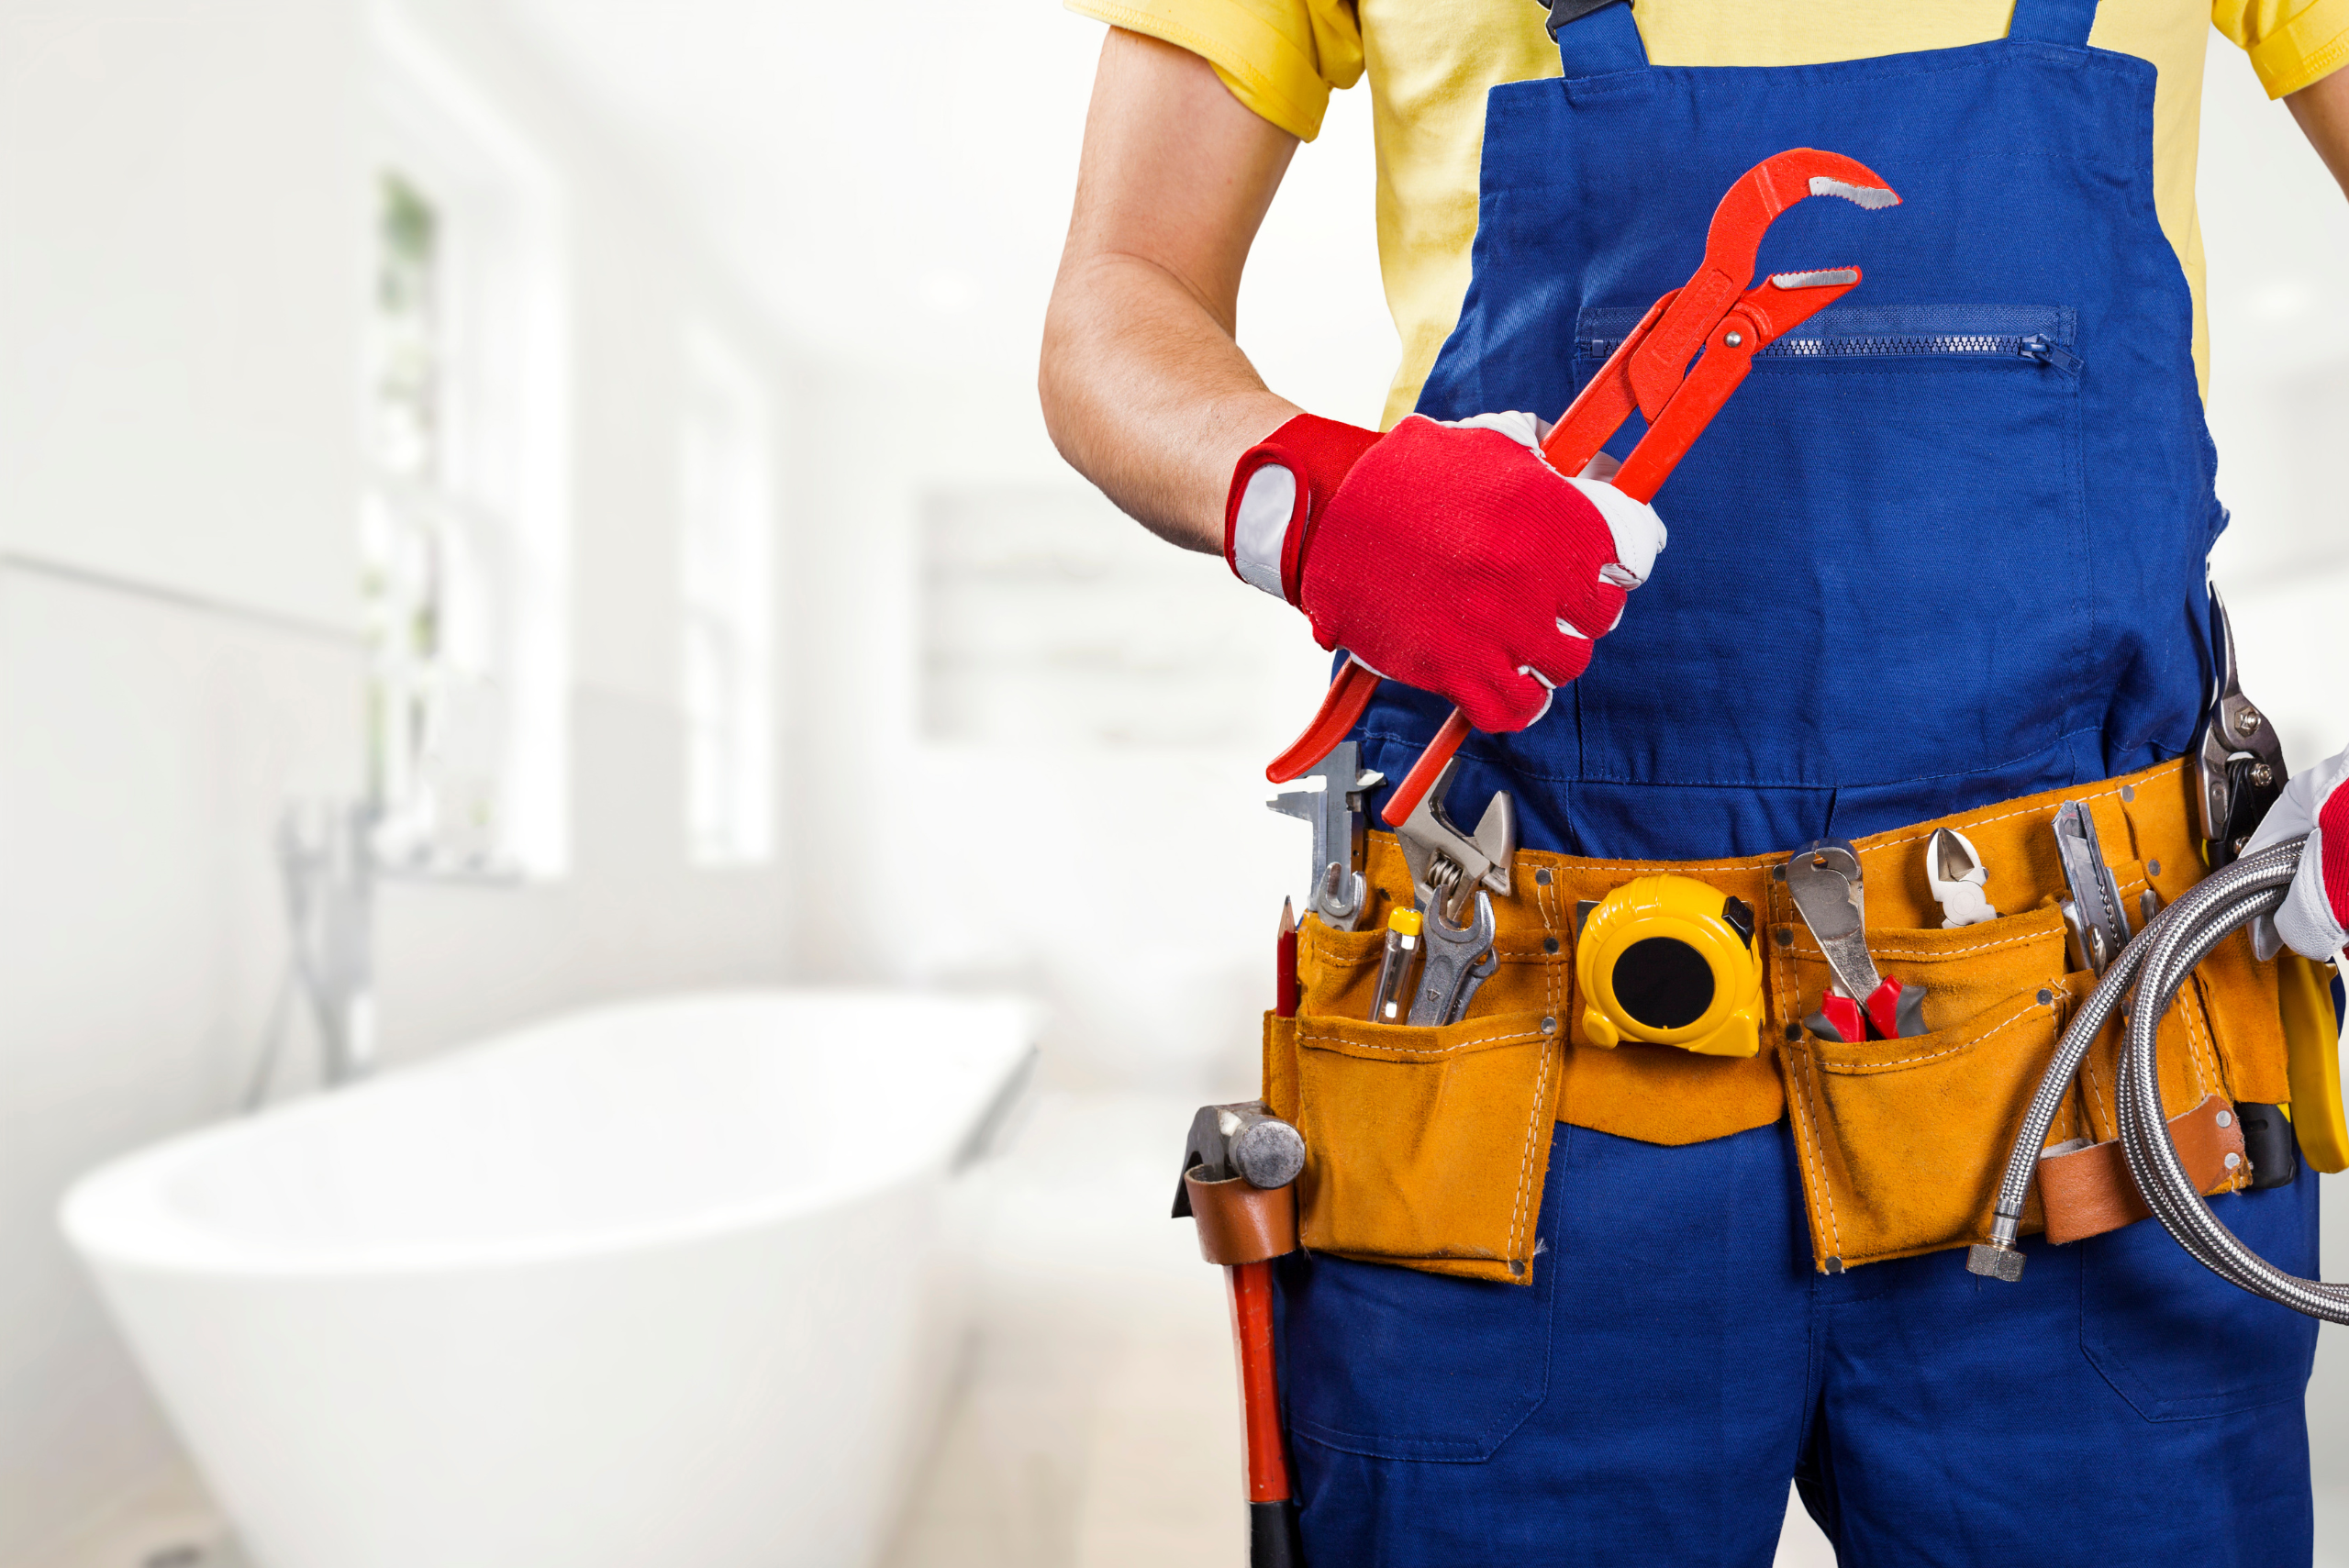 Handyman in blue overalls with tool belt.